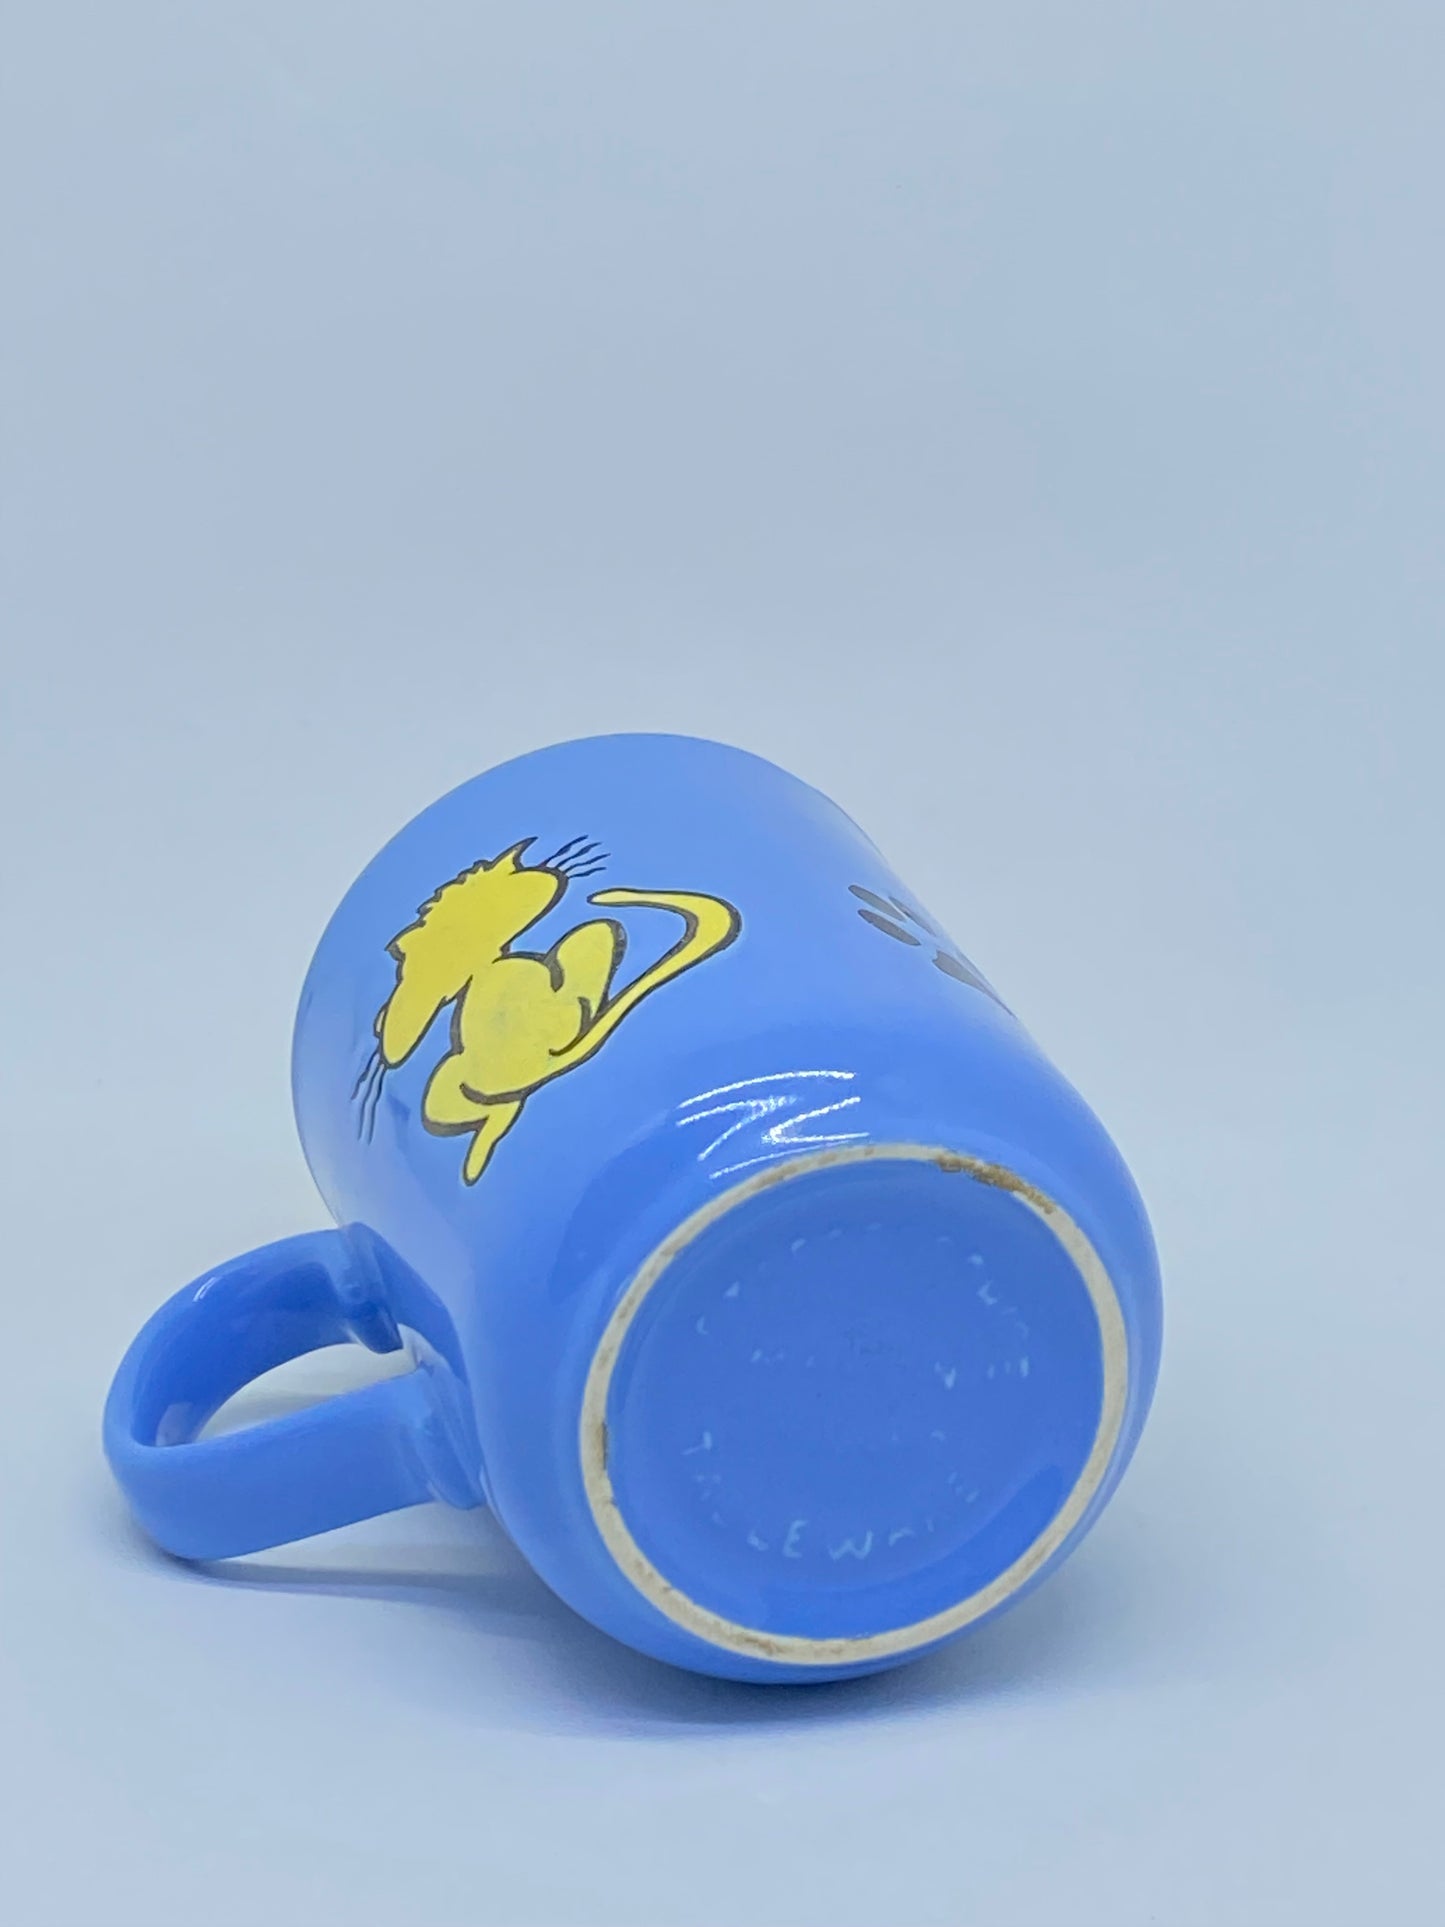 Retro 1980s Staffordshire Cat Cup - light blue and yellow